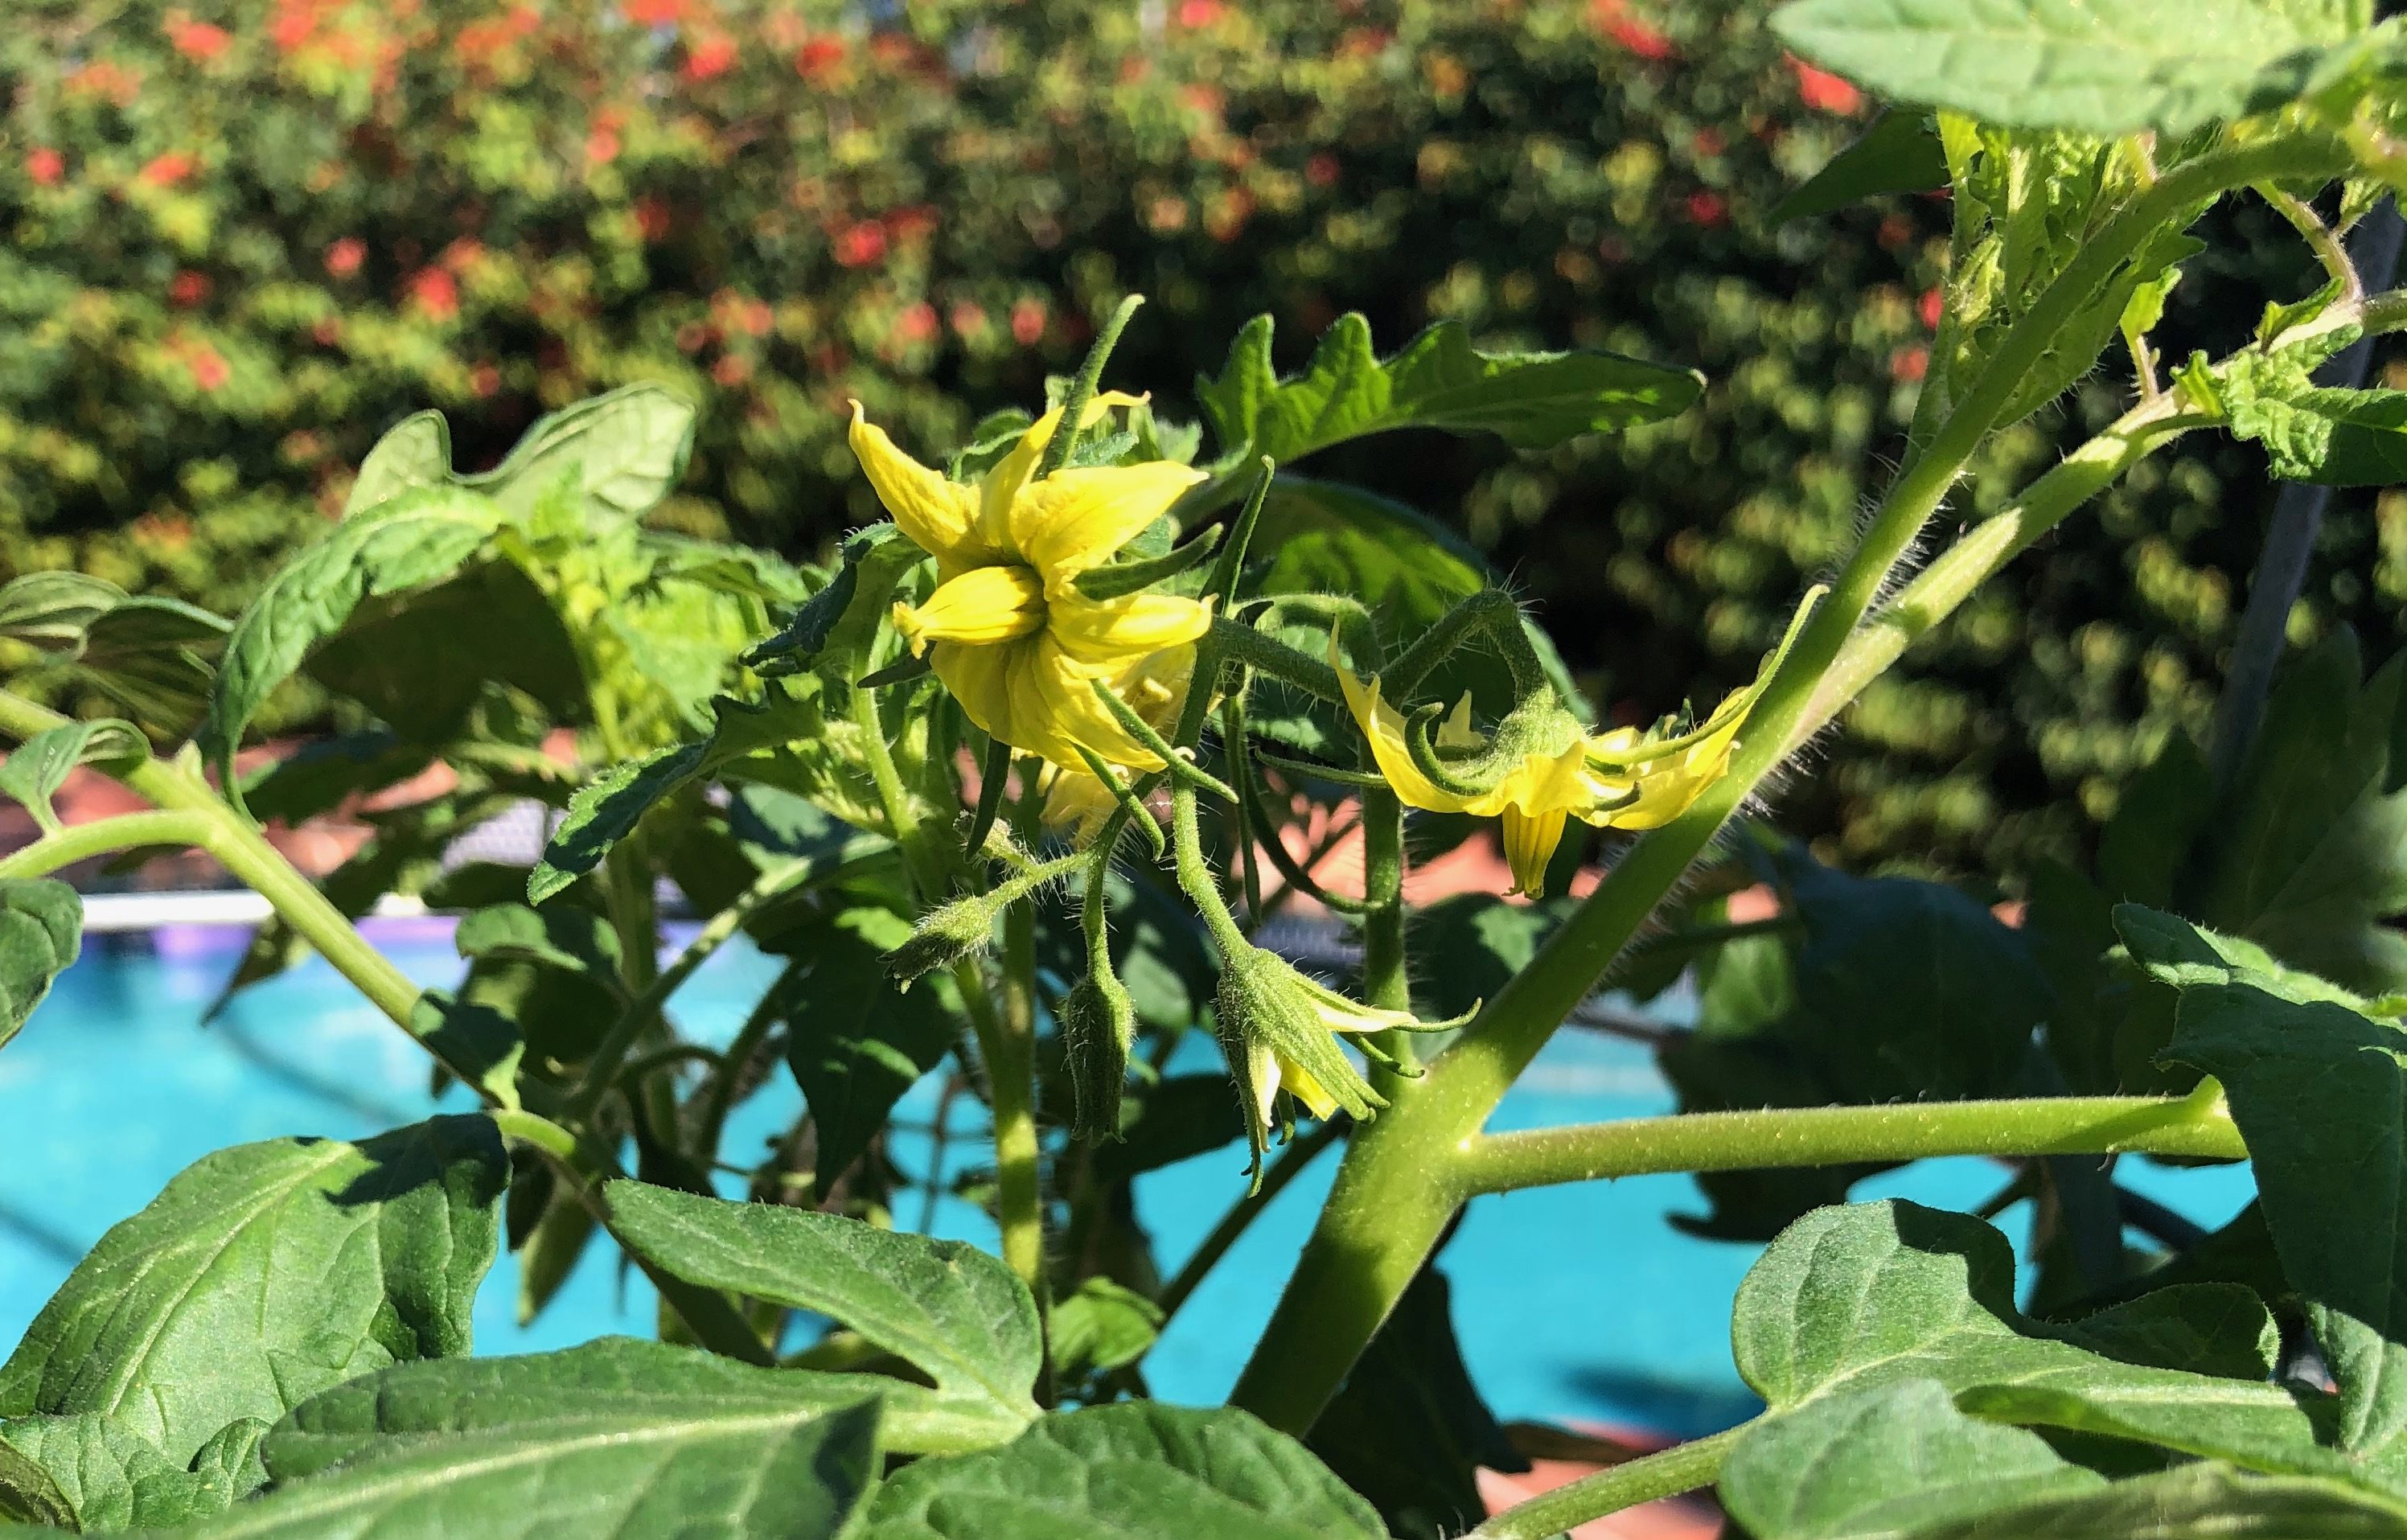 Yellow Flowers Blooming on Sherrin's Tomato Plant in her back yard